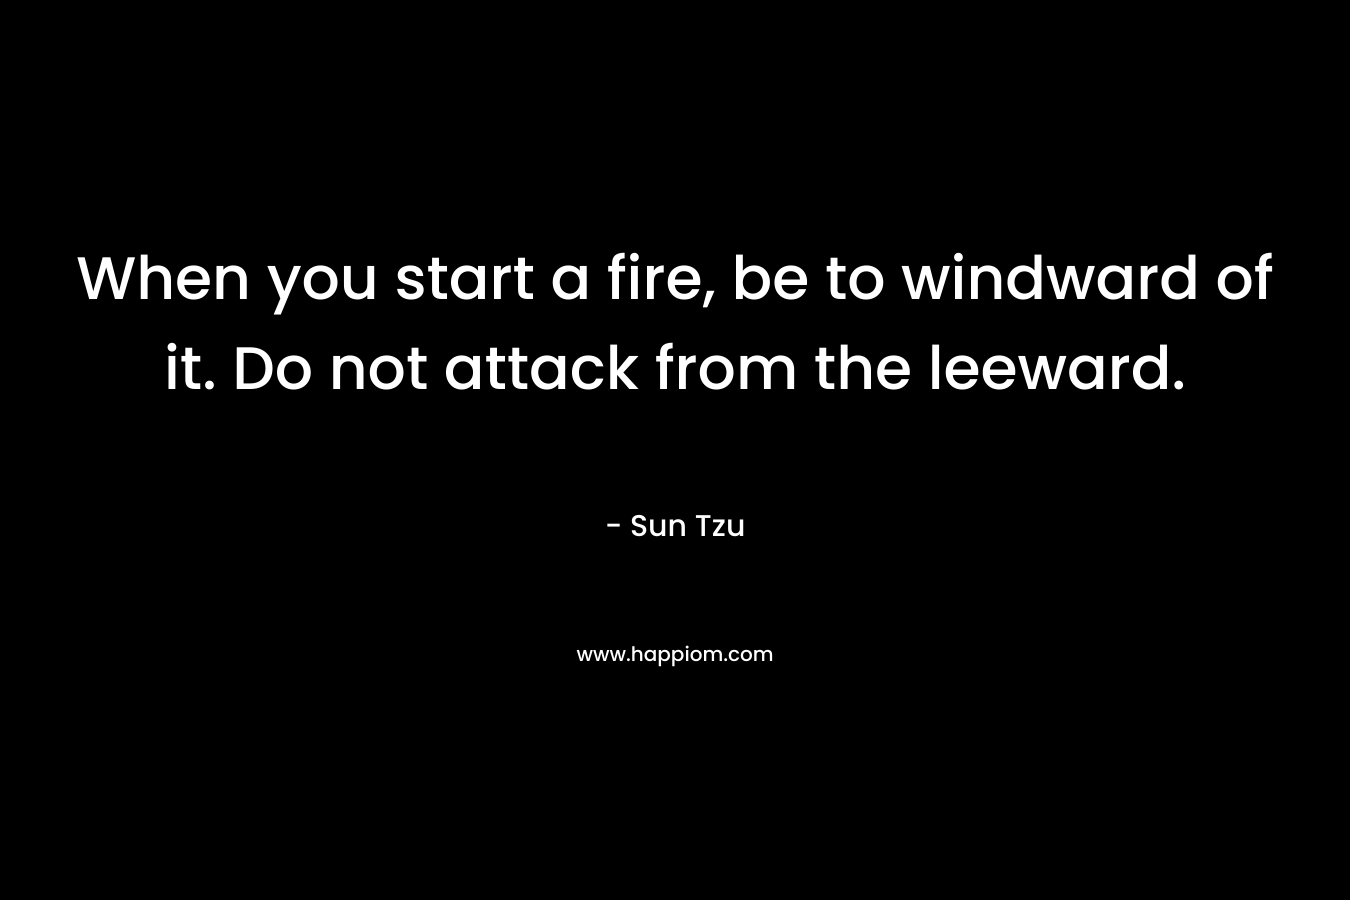 When you start a fire, be to windward of it. Do not attack from the leeward. – Sun Tzu